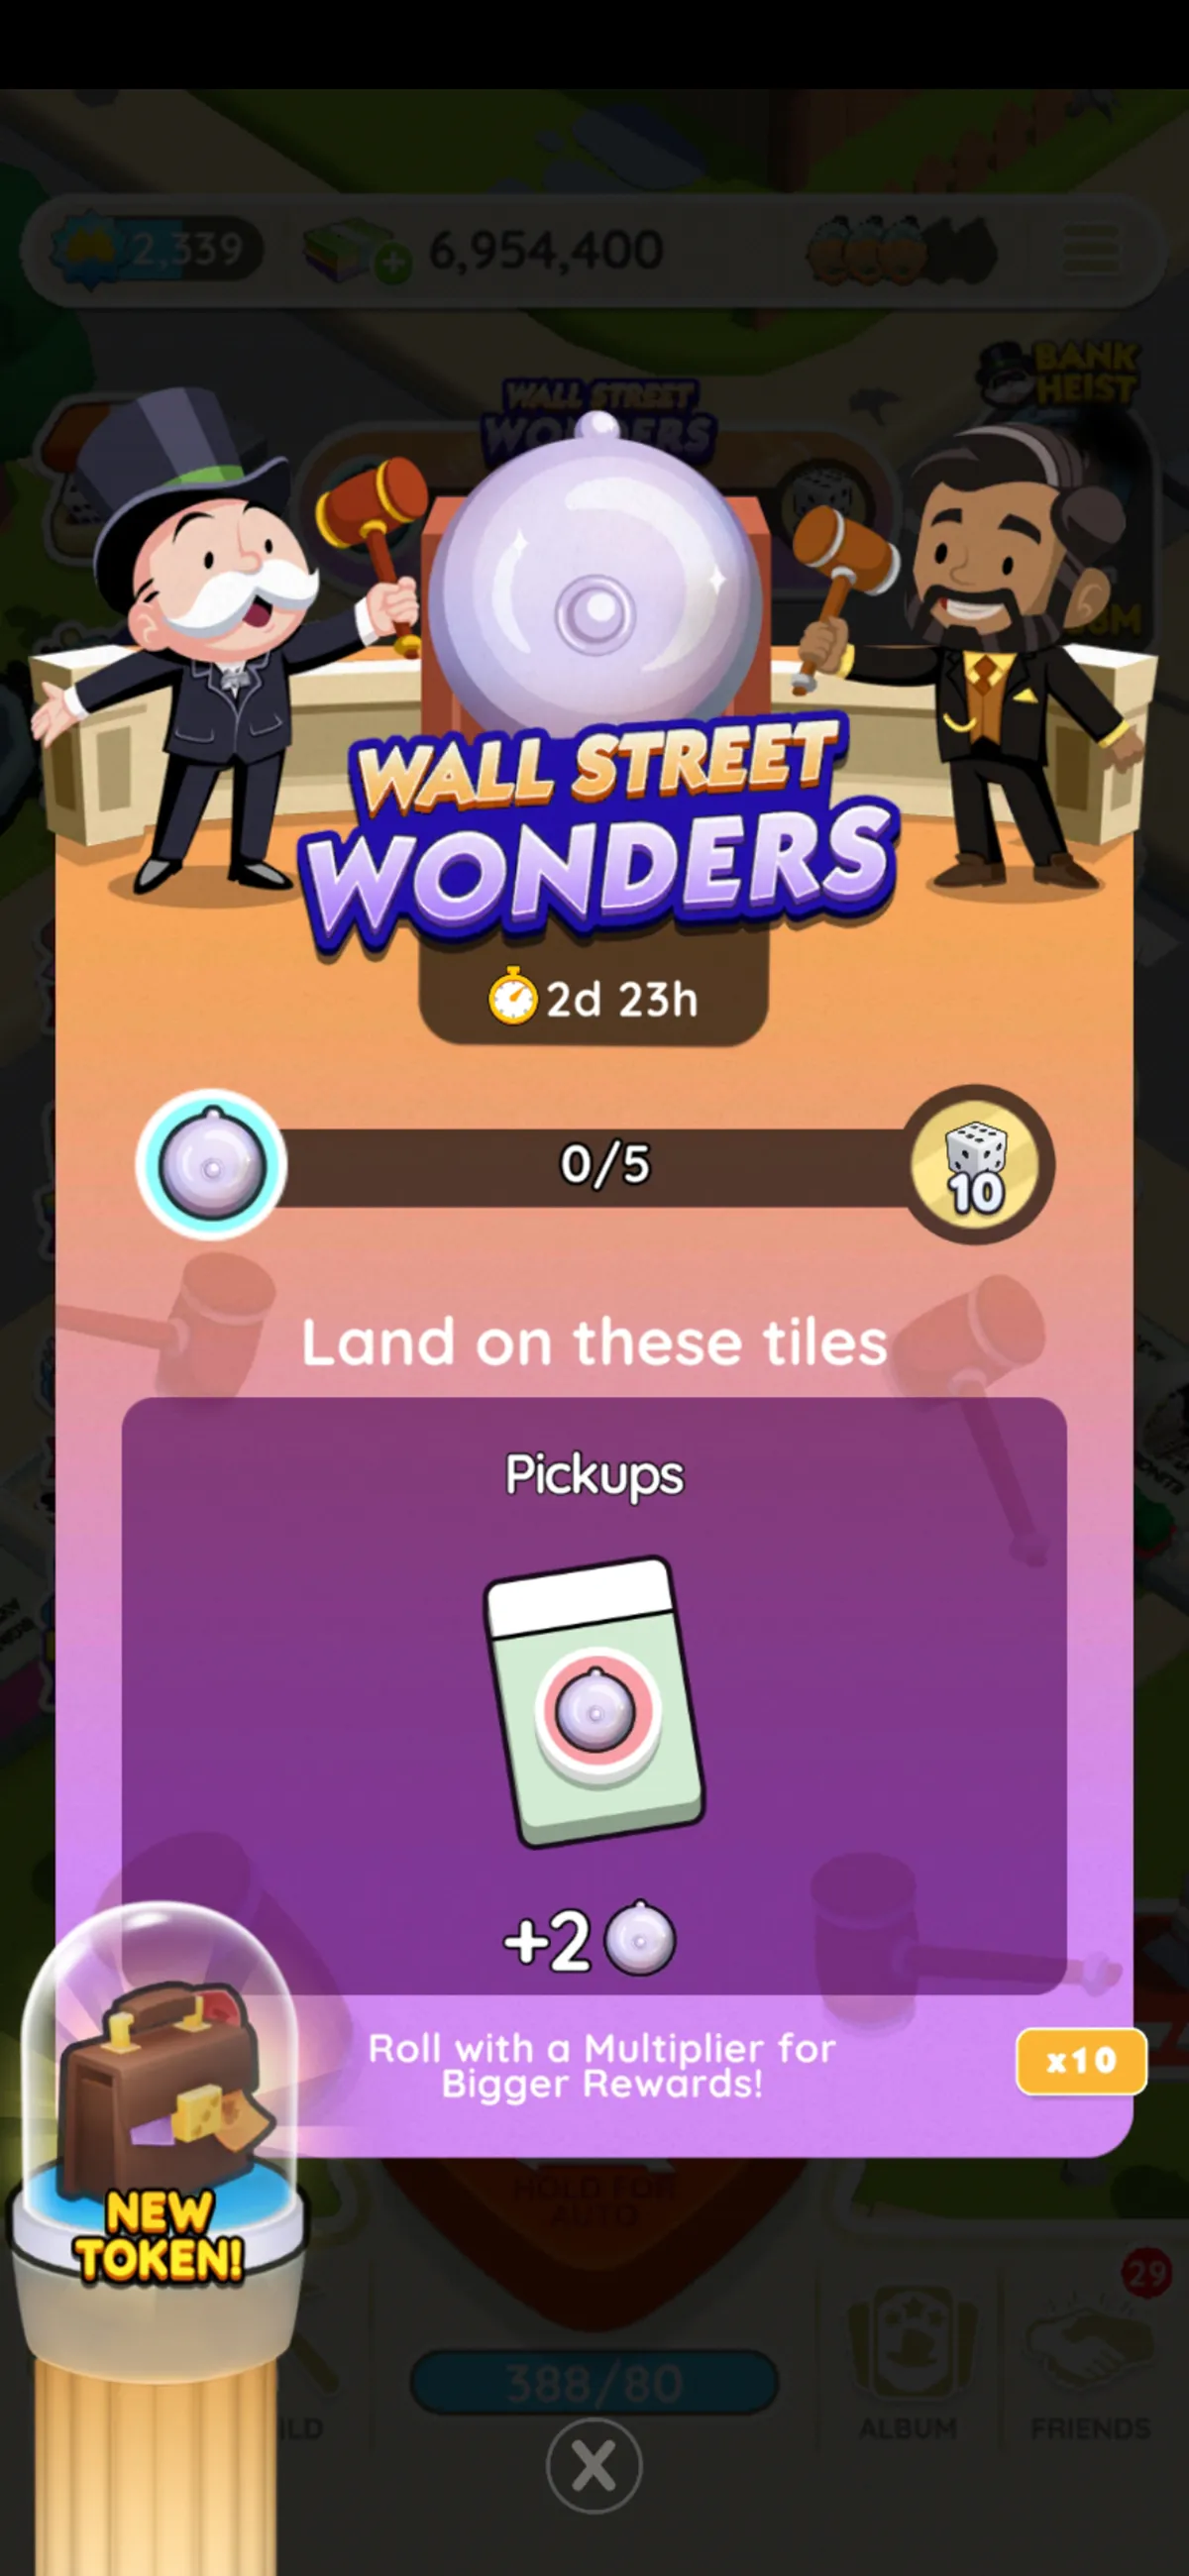 An image of the rules for the Wall Street Wonders event in Monopoly GO. The image shows Rich Uncle Pennybags on the left-side of a bell with another man on the right side about to ring it. Both are holding hammers.